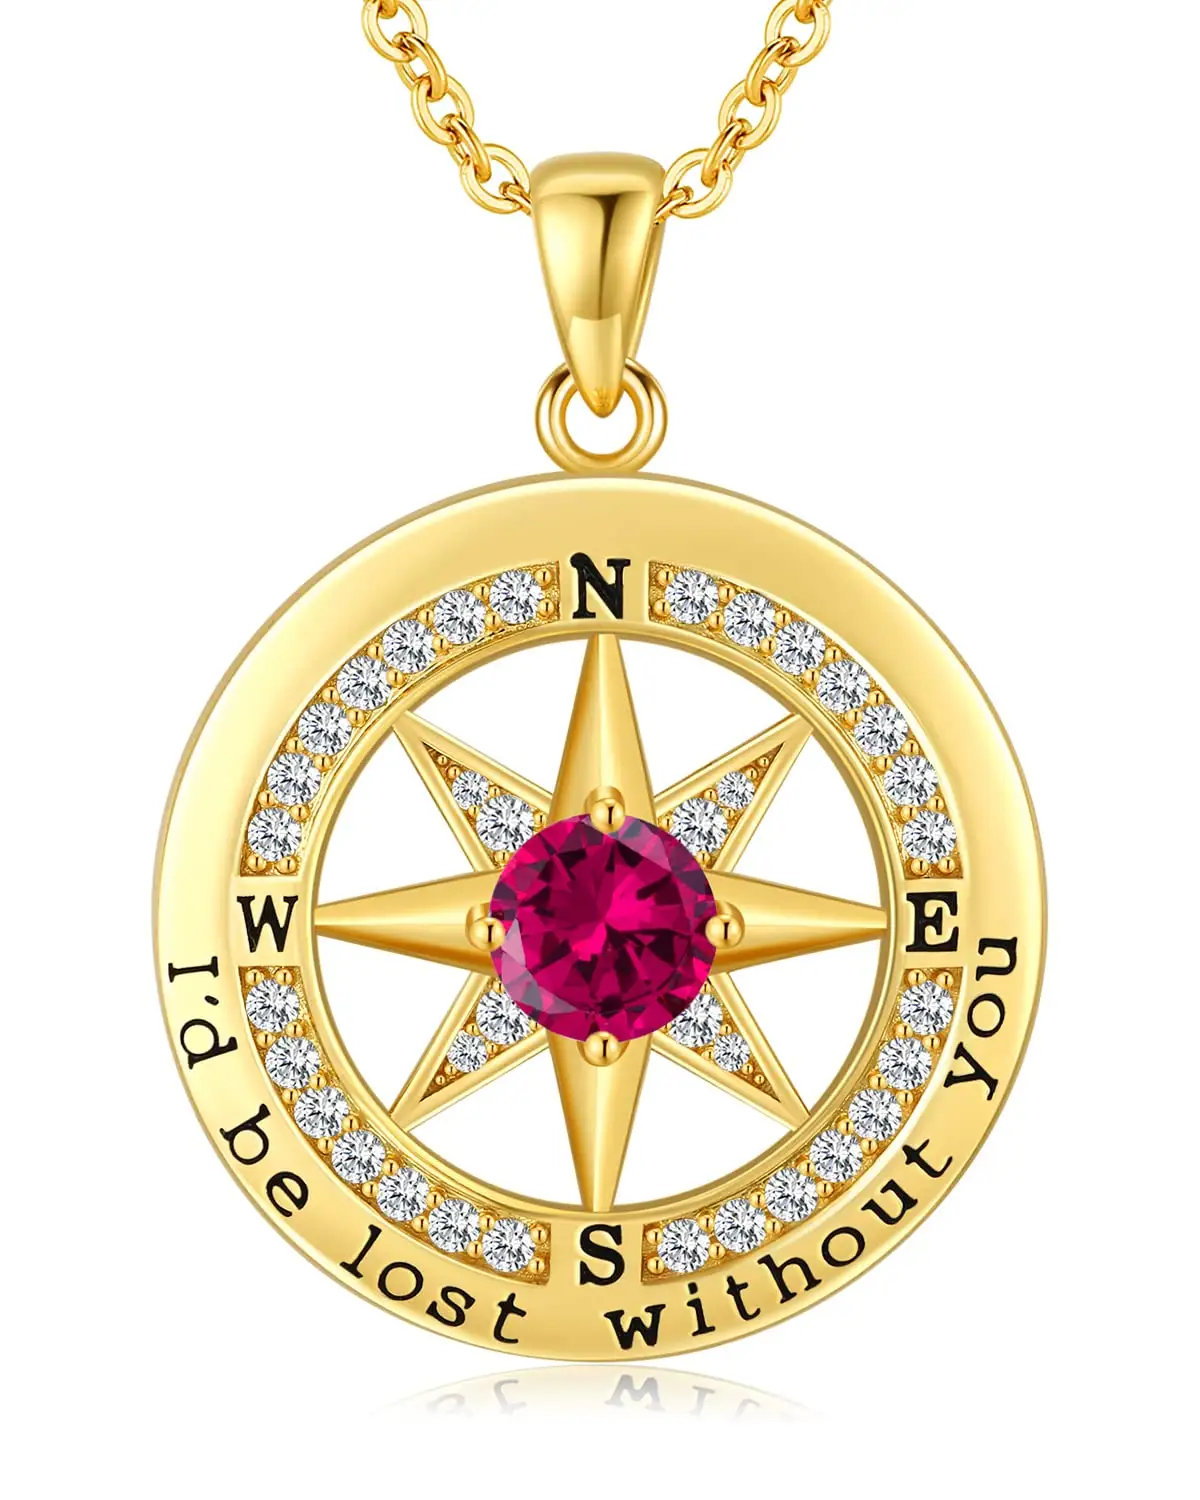 Amazon Vintage Multi coloured stone Pendant Charm Compass Jewelry S925 Necklace Gift for Wife